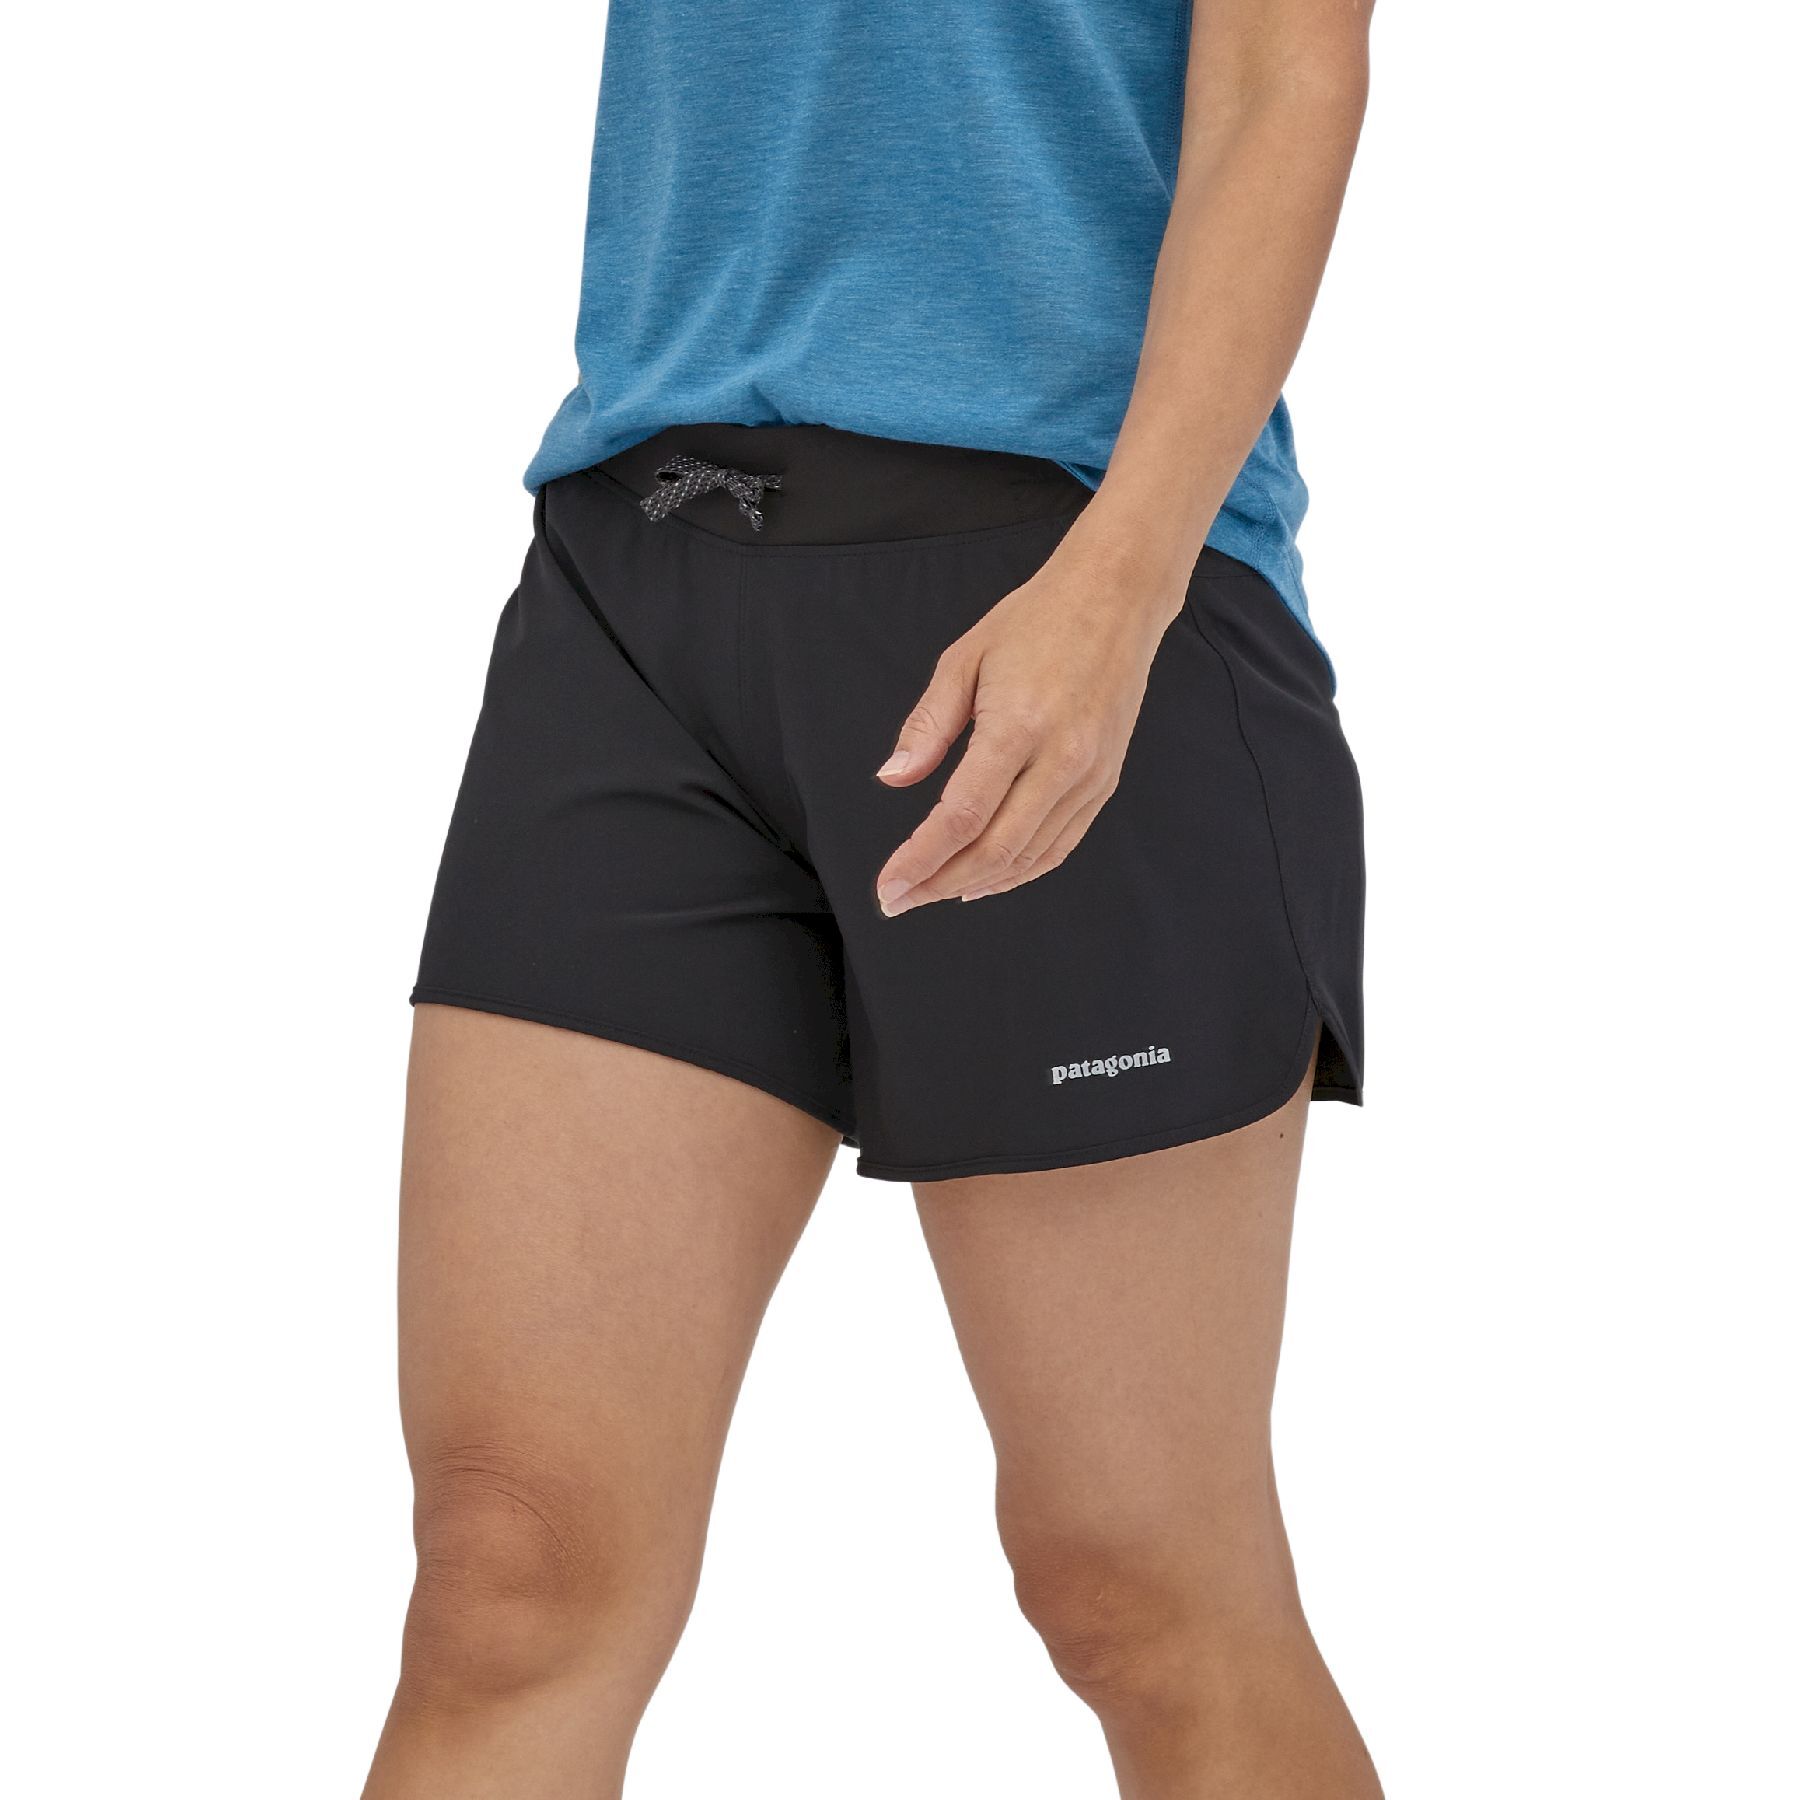 Patagonia Nine Trails Shorts - 6 in. - Trail running shorts - Women's